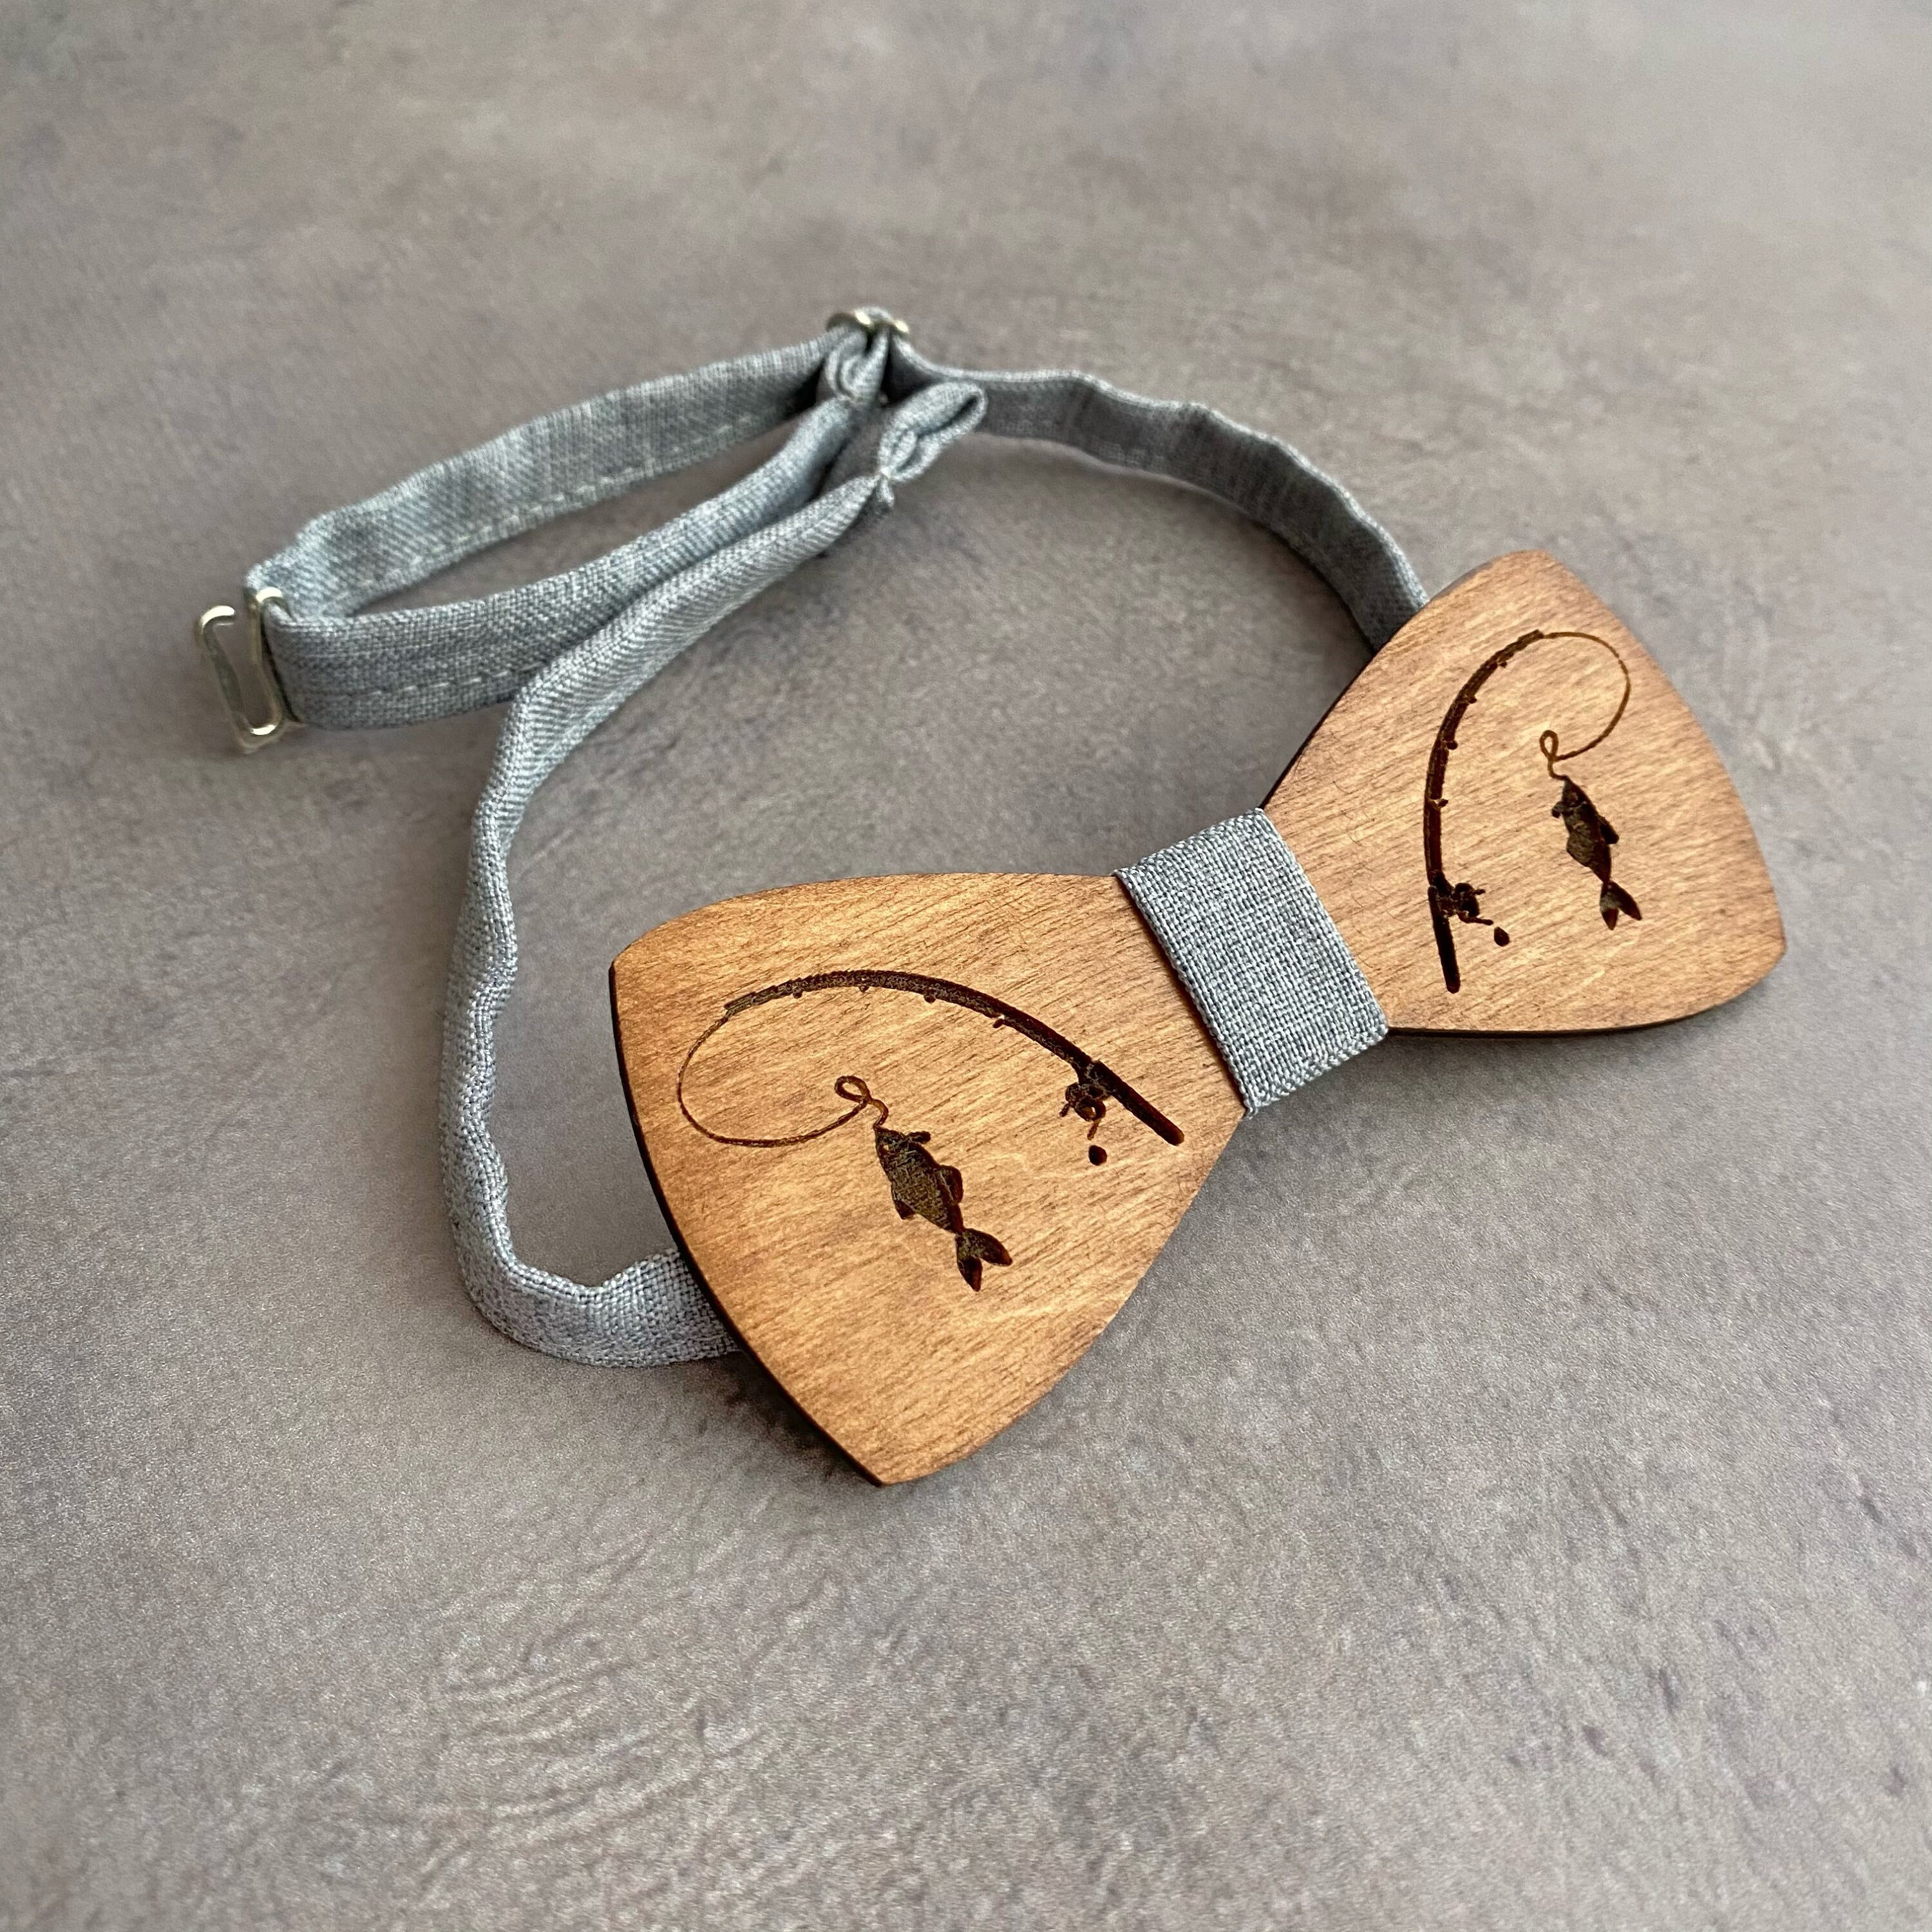 Wooden fish bow tie and suspenders Fathers day gift from | Etsy